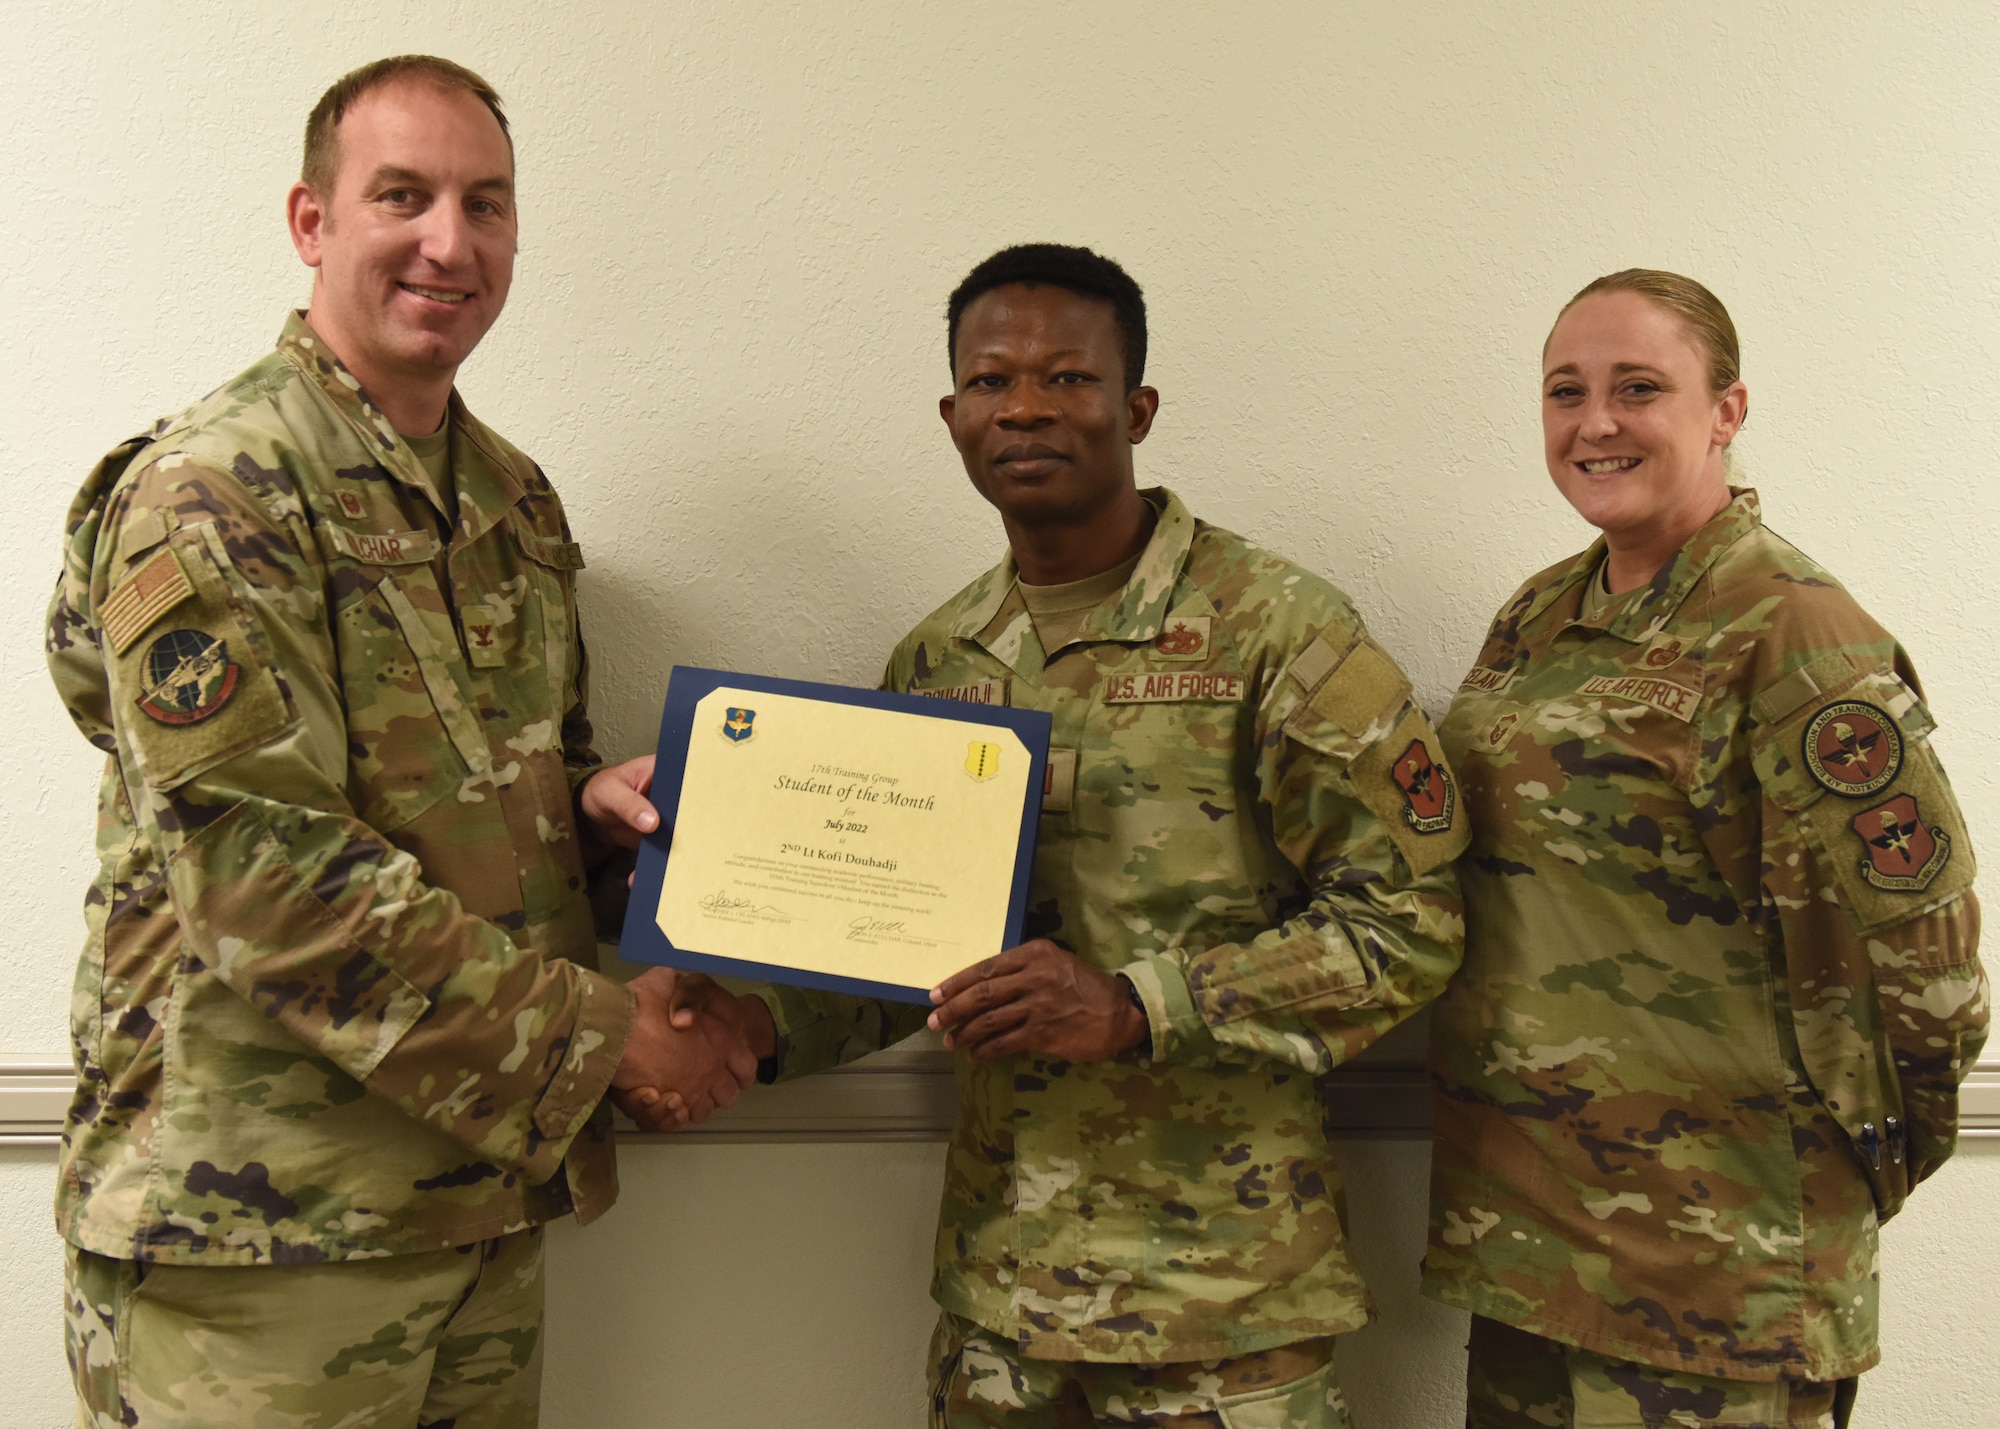 U.S. Air Force Col. Jason Kulchar, 17th Training Group commander, and Senior Master Sgt. Heather Celano, 313th Training Squadron senior enlisted leader, present the 315th Training Squadron Student of the Month award to 2nd Lt. Kofi Douhadji, 315th TRS officer student, at Goodfellow Air Force Base, Texas, August 12, 2022. Douhadji worked hard for his award and has shown his dedication to his squadron and the training he received at Goodfellow. (U.S. Air Force photo by Airman 1st Class Zachary Heimbuch)